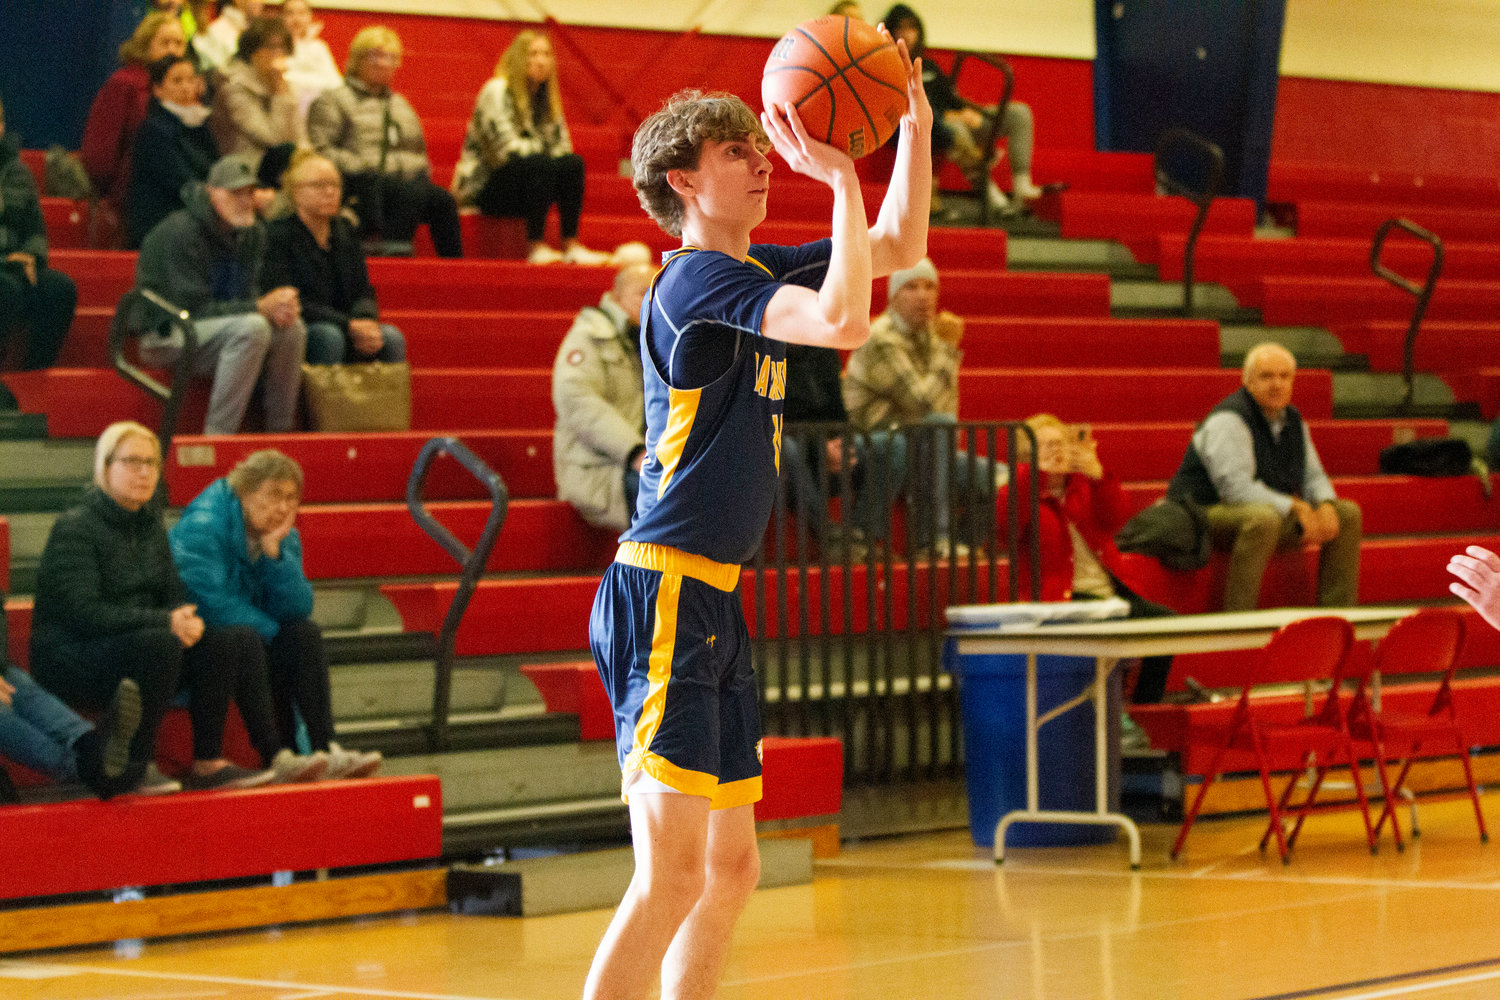 Barrington High School’s Sean Bonneau, shown in a game earlier this season, hit eight three-pointers and finished with a game-high 28 points as the Eagles defeated Narragansett on Wednesday night, Jan. 25.